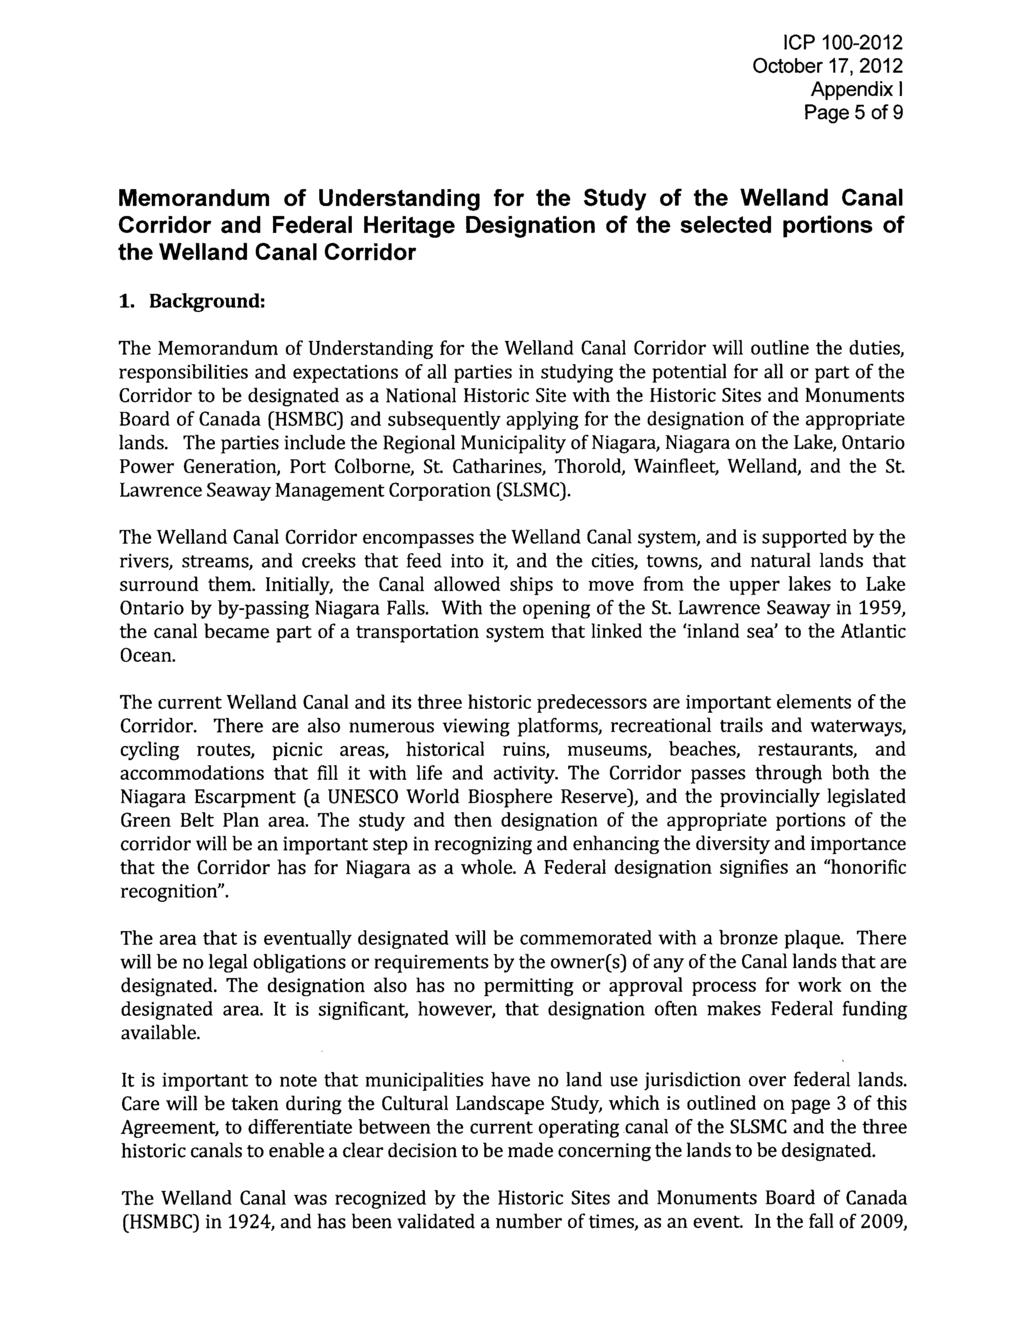 Appendix l Page 5 of 9 Memorandum of Understanding for the Study of the Welland Canal Corridor and Federal Heritage Designation of the selected portions of the Welland Canal Corridor 1.